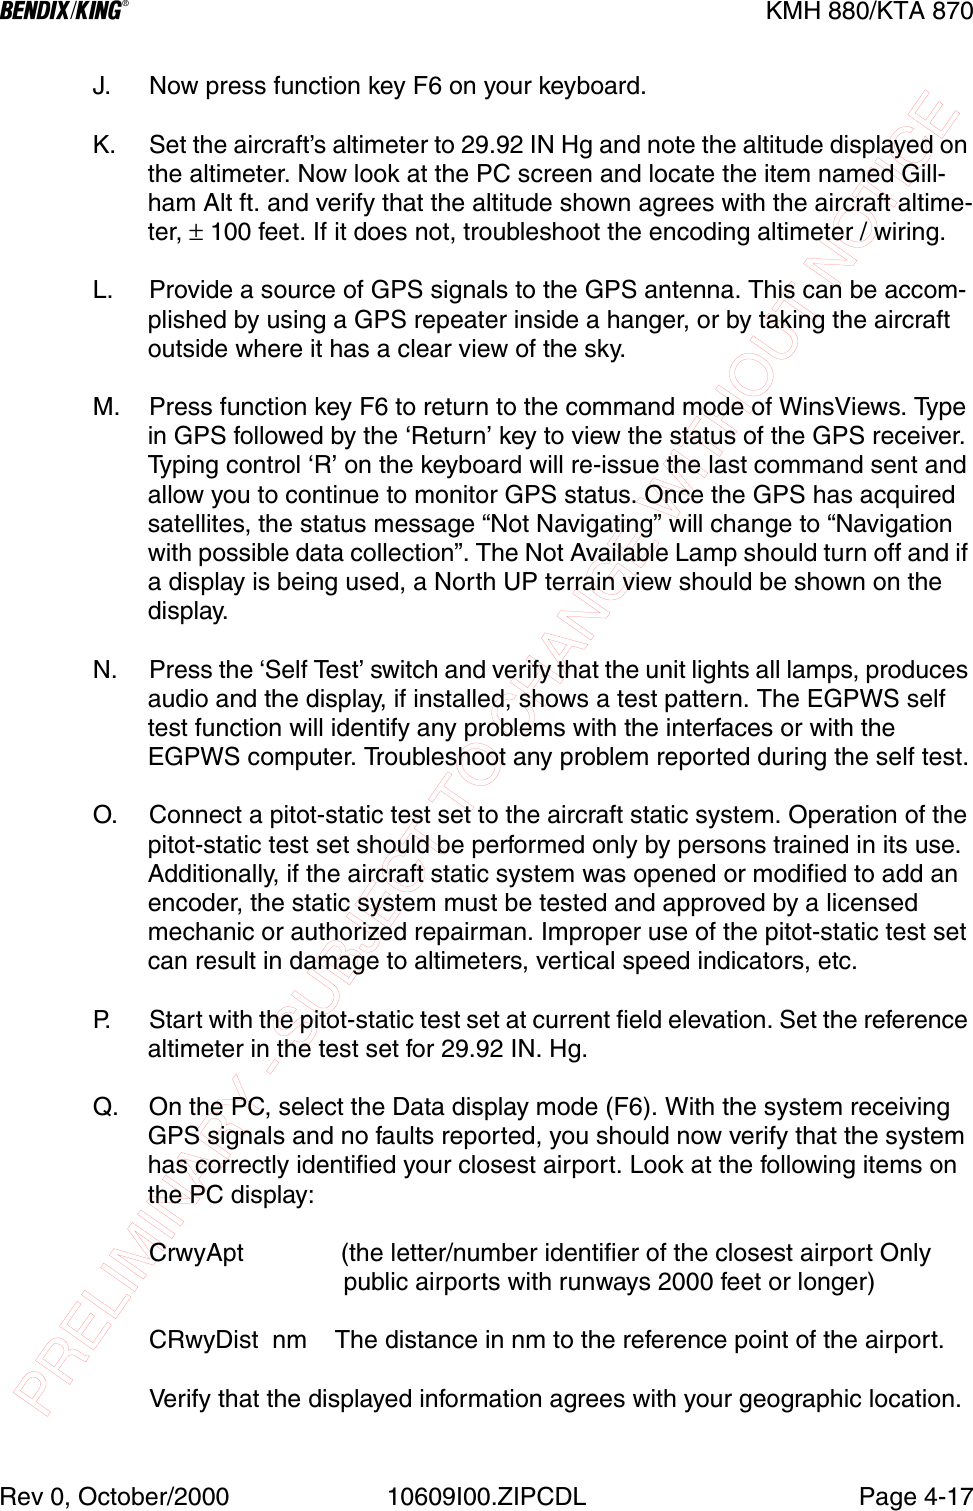 PRELIMINARY - SUBJECT TO CHANGE WITHOUT NOTICEBKMH 880/KTA 870Rev 0, October/2000 10609I00.ZIPCDL Page 4-17J. Now press function key F6 on your keyboard.K. Set the aircraft’s altimeter to 29.92 IN Hg and note the altitude displayed on the altimeter. Now look at the PC screen and locate the item named Gill-ham Alt ft. and verify that the altitude shown agrees with the aircraft altime-ter, ± 100 feet. If it does not, troubleshoot the encoding altimeter / wiring.L. Provide a source of GPS signals to the GPS antenna. This can be accom-plished by using a GPS repeater inside a hanger, or by taking the aircraft outside where it has a clear view of the sky.M. Press function key F6 to return to the command mode of WinsViews. Type in GPS followed by the ‘Return’ key to view the status of the GPS receiver. Typing control ‘R’ on the keyboard will re-issue the last command sent and allow you to continue to monitor GPS status. Once the GPS has acquired satellites, the status message “Not Navigating” will change to “Navigation with possible data collection”. The Not Available Lamp should turn off and if a display is being used, a North UP terrain view should be shown on the display.N. Press the ‘Self Test’ switch and verify that the unit lights all lamps, produces audio and the display, if installed, shows a test pattern. The EGPWS self test function will identify any problems with the interfaces or with the EGPWS computer. Troubleshoot any problem reported during the self test.O. Connect a pitot-static test set to the aircraft static system. Operation of the pitot-static test set should be performed only by persons trained in its use. Additionally, if the aircraft static system was opened or modified to add an encoder, the static system must be tested and approved by a licensed mechanic or authorized repairman. Improper use of the pitot-static test set can result in damage to altimeters, vertical speed indicators, etc.P. Start with the pitot-static test set at current field elevation. Set the reference altimeter in the test set for 29.92 IN. Hg.Q. On the PC, select the Data display mode (F6). With the system receiving GPS signals and no faults reported, you should now verify that the system has correctly identified your closest airport. Look at the following items on the PC display:CrwyApt              (the letter/number identifier of the closest airport Only                      public airports with runways 2000 feet or longer)CRwyDist  nm    The distance in nm to the reference point of the airport.Verify that the displayed information agrees with your geographic location.